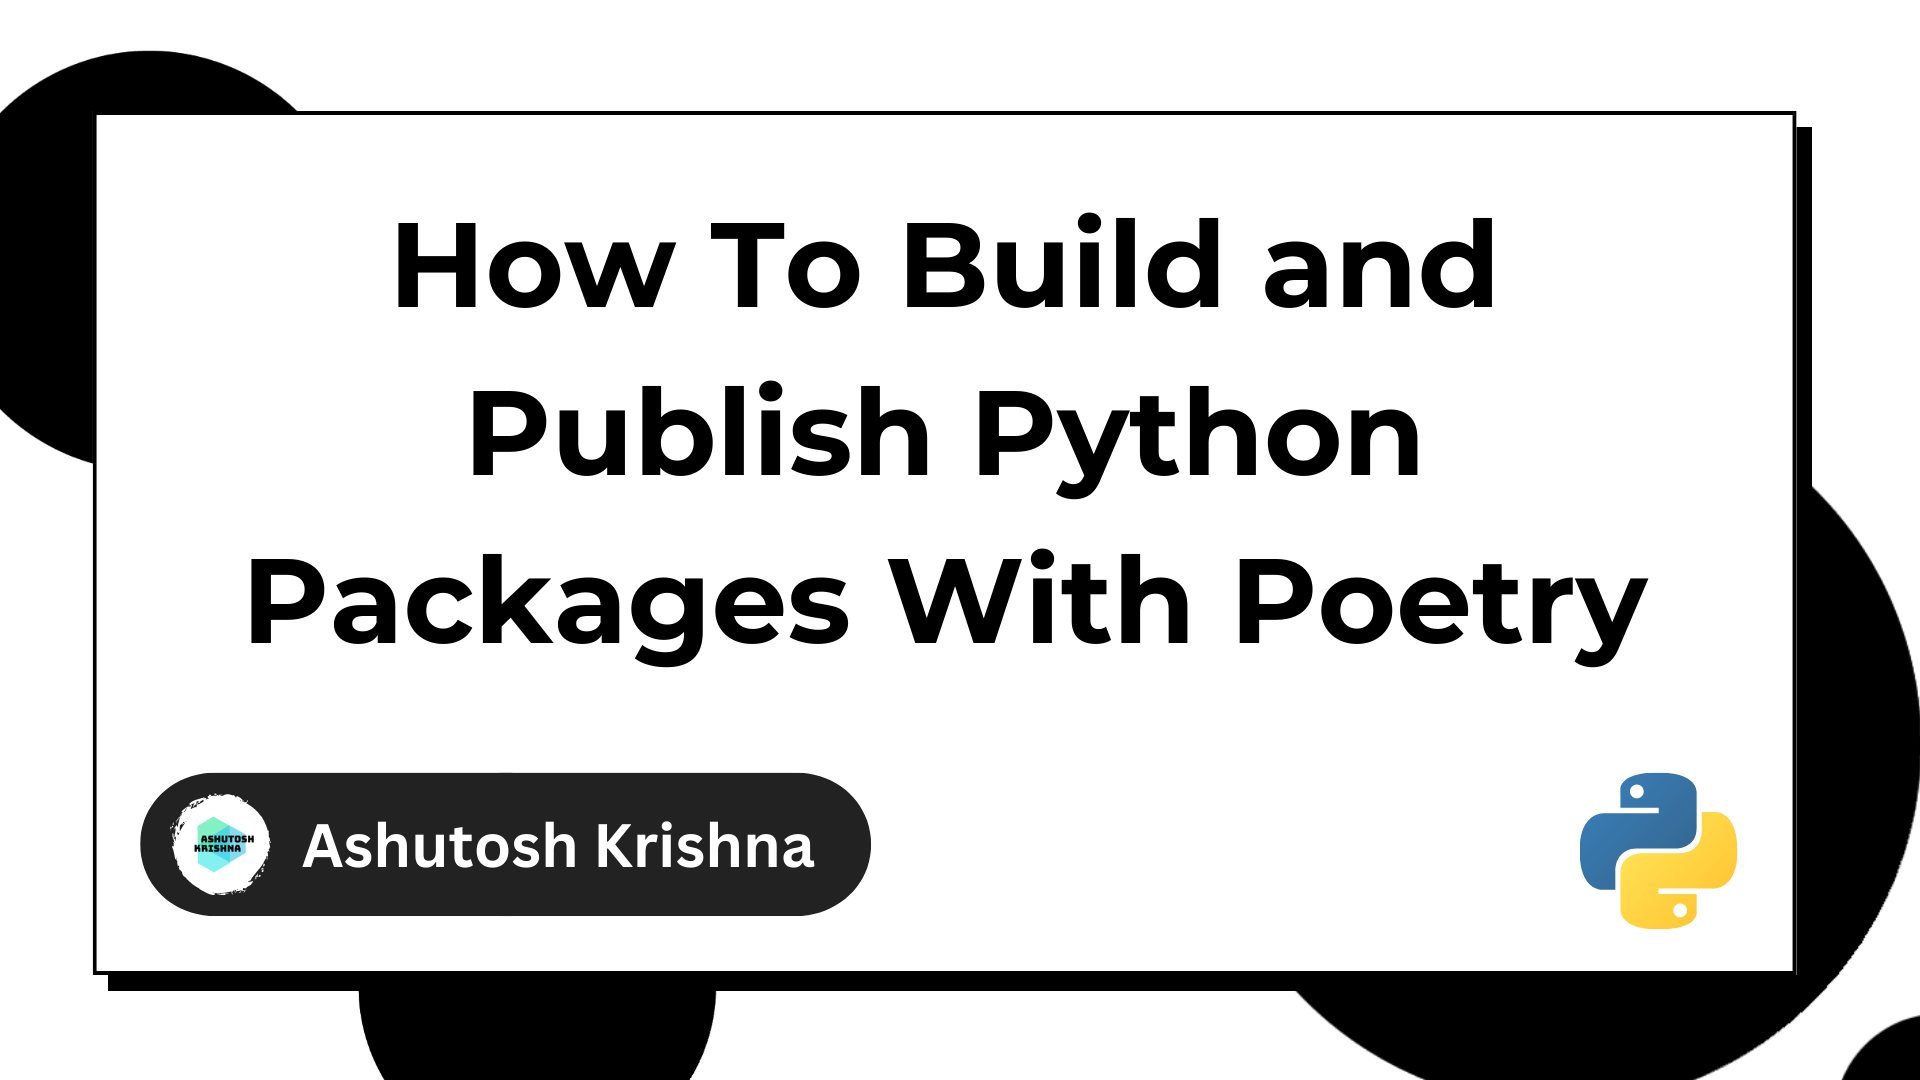 How to Build and Publish Python Packages With Poetry